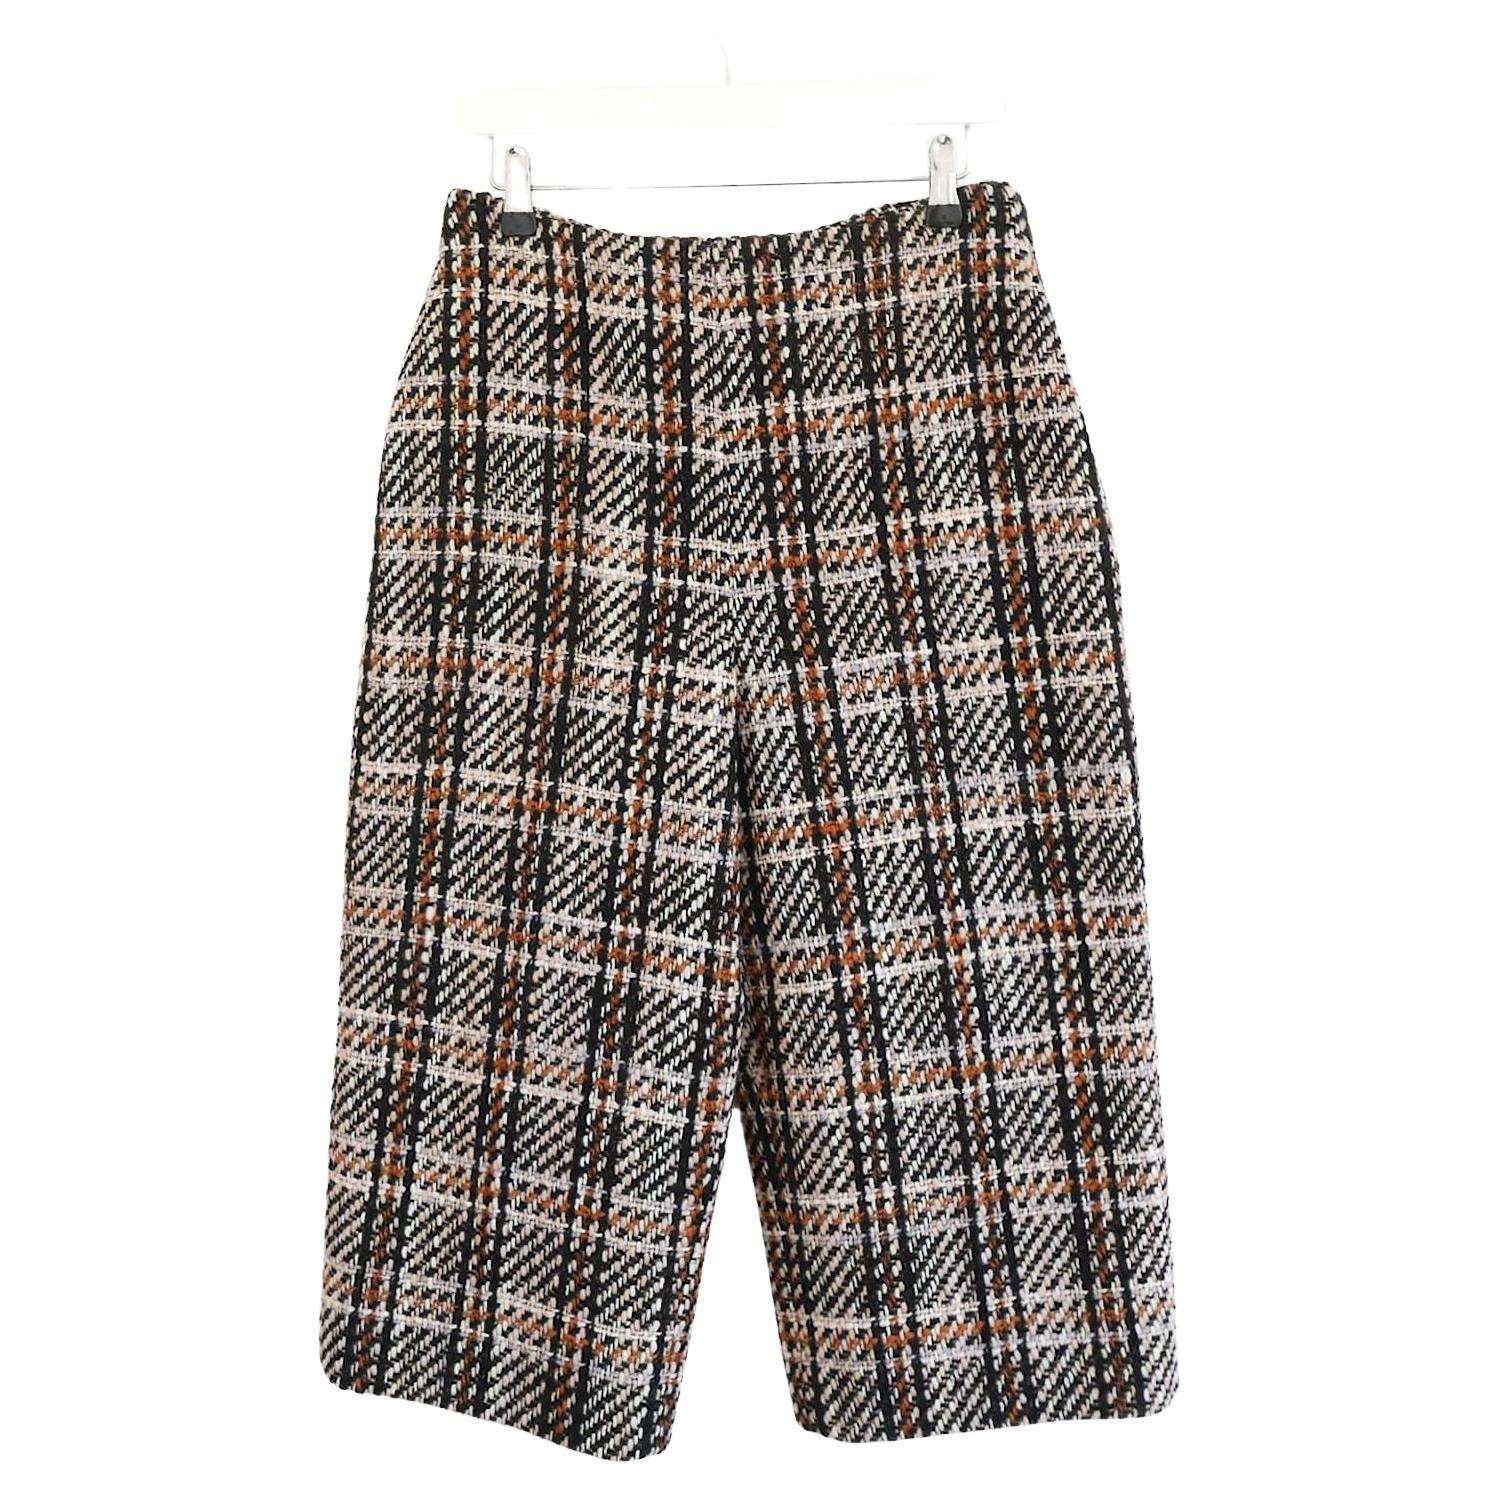 Valentino Pre-Fal 2014 Tweed Culottes Cropped Pants For Sale